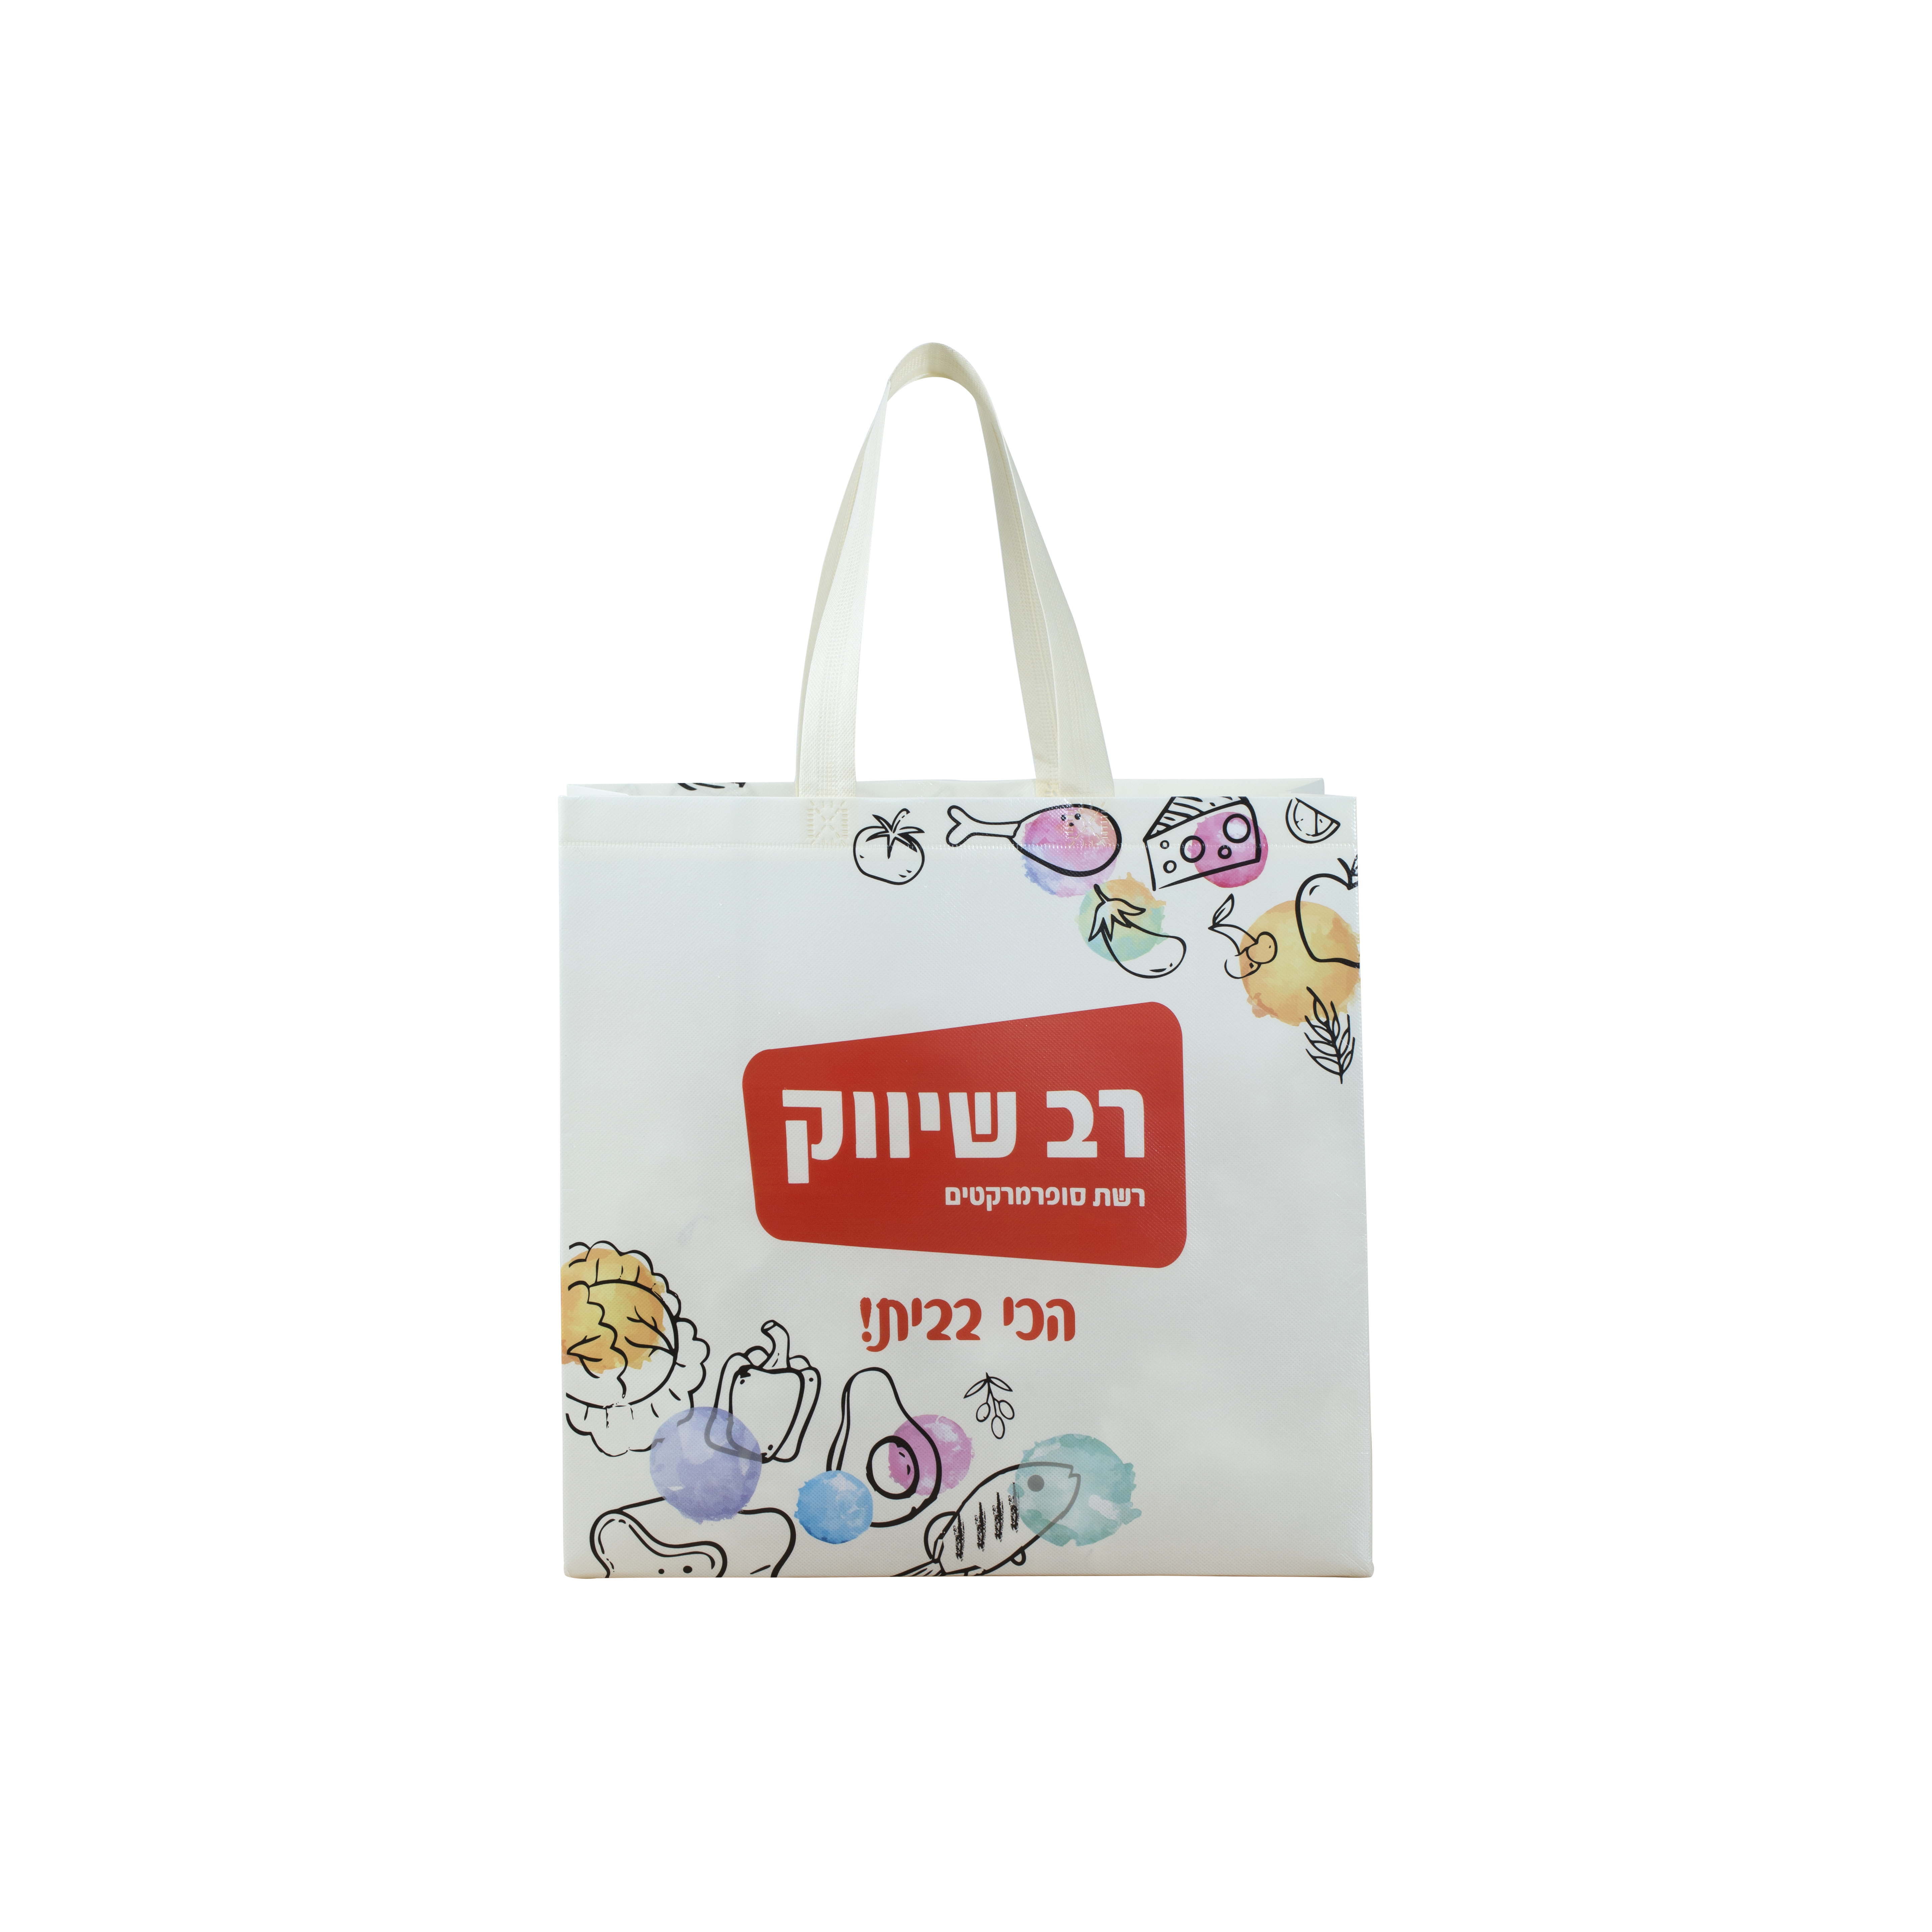 Cheap white cotton tote bags,China cotton tote bags with zipper,large cotton tote bags,cotton produce storage bags,personalised cotton bags